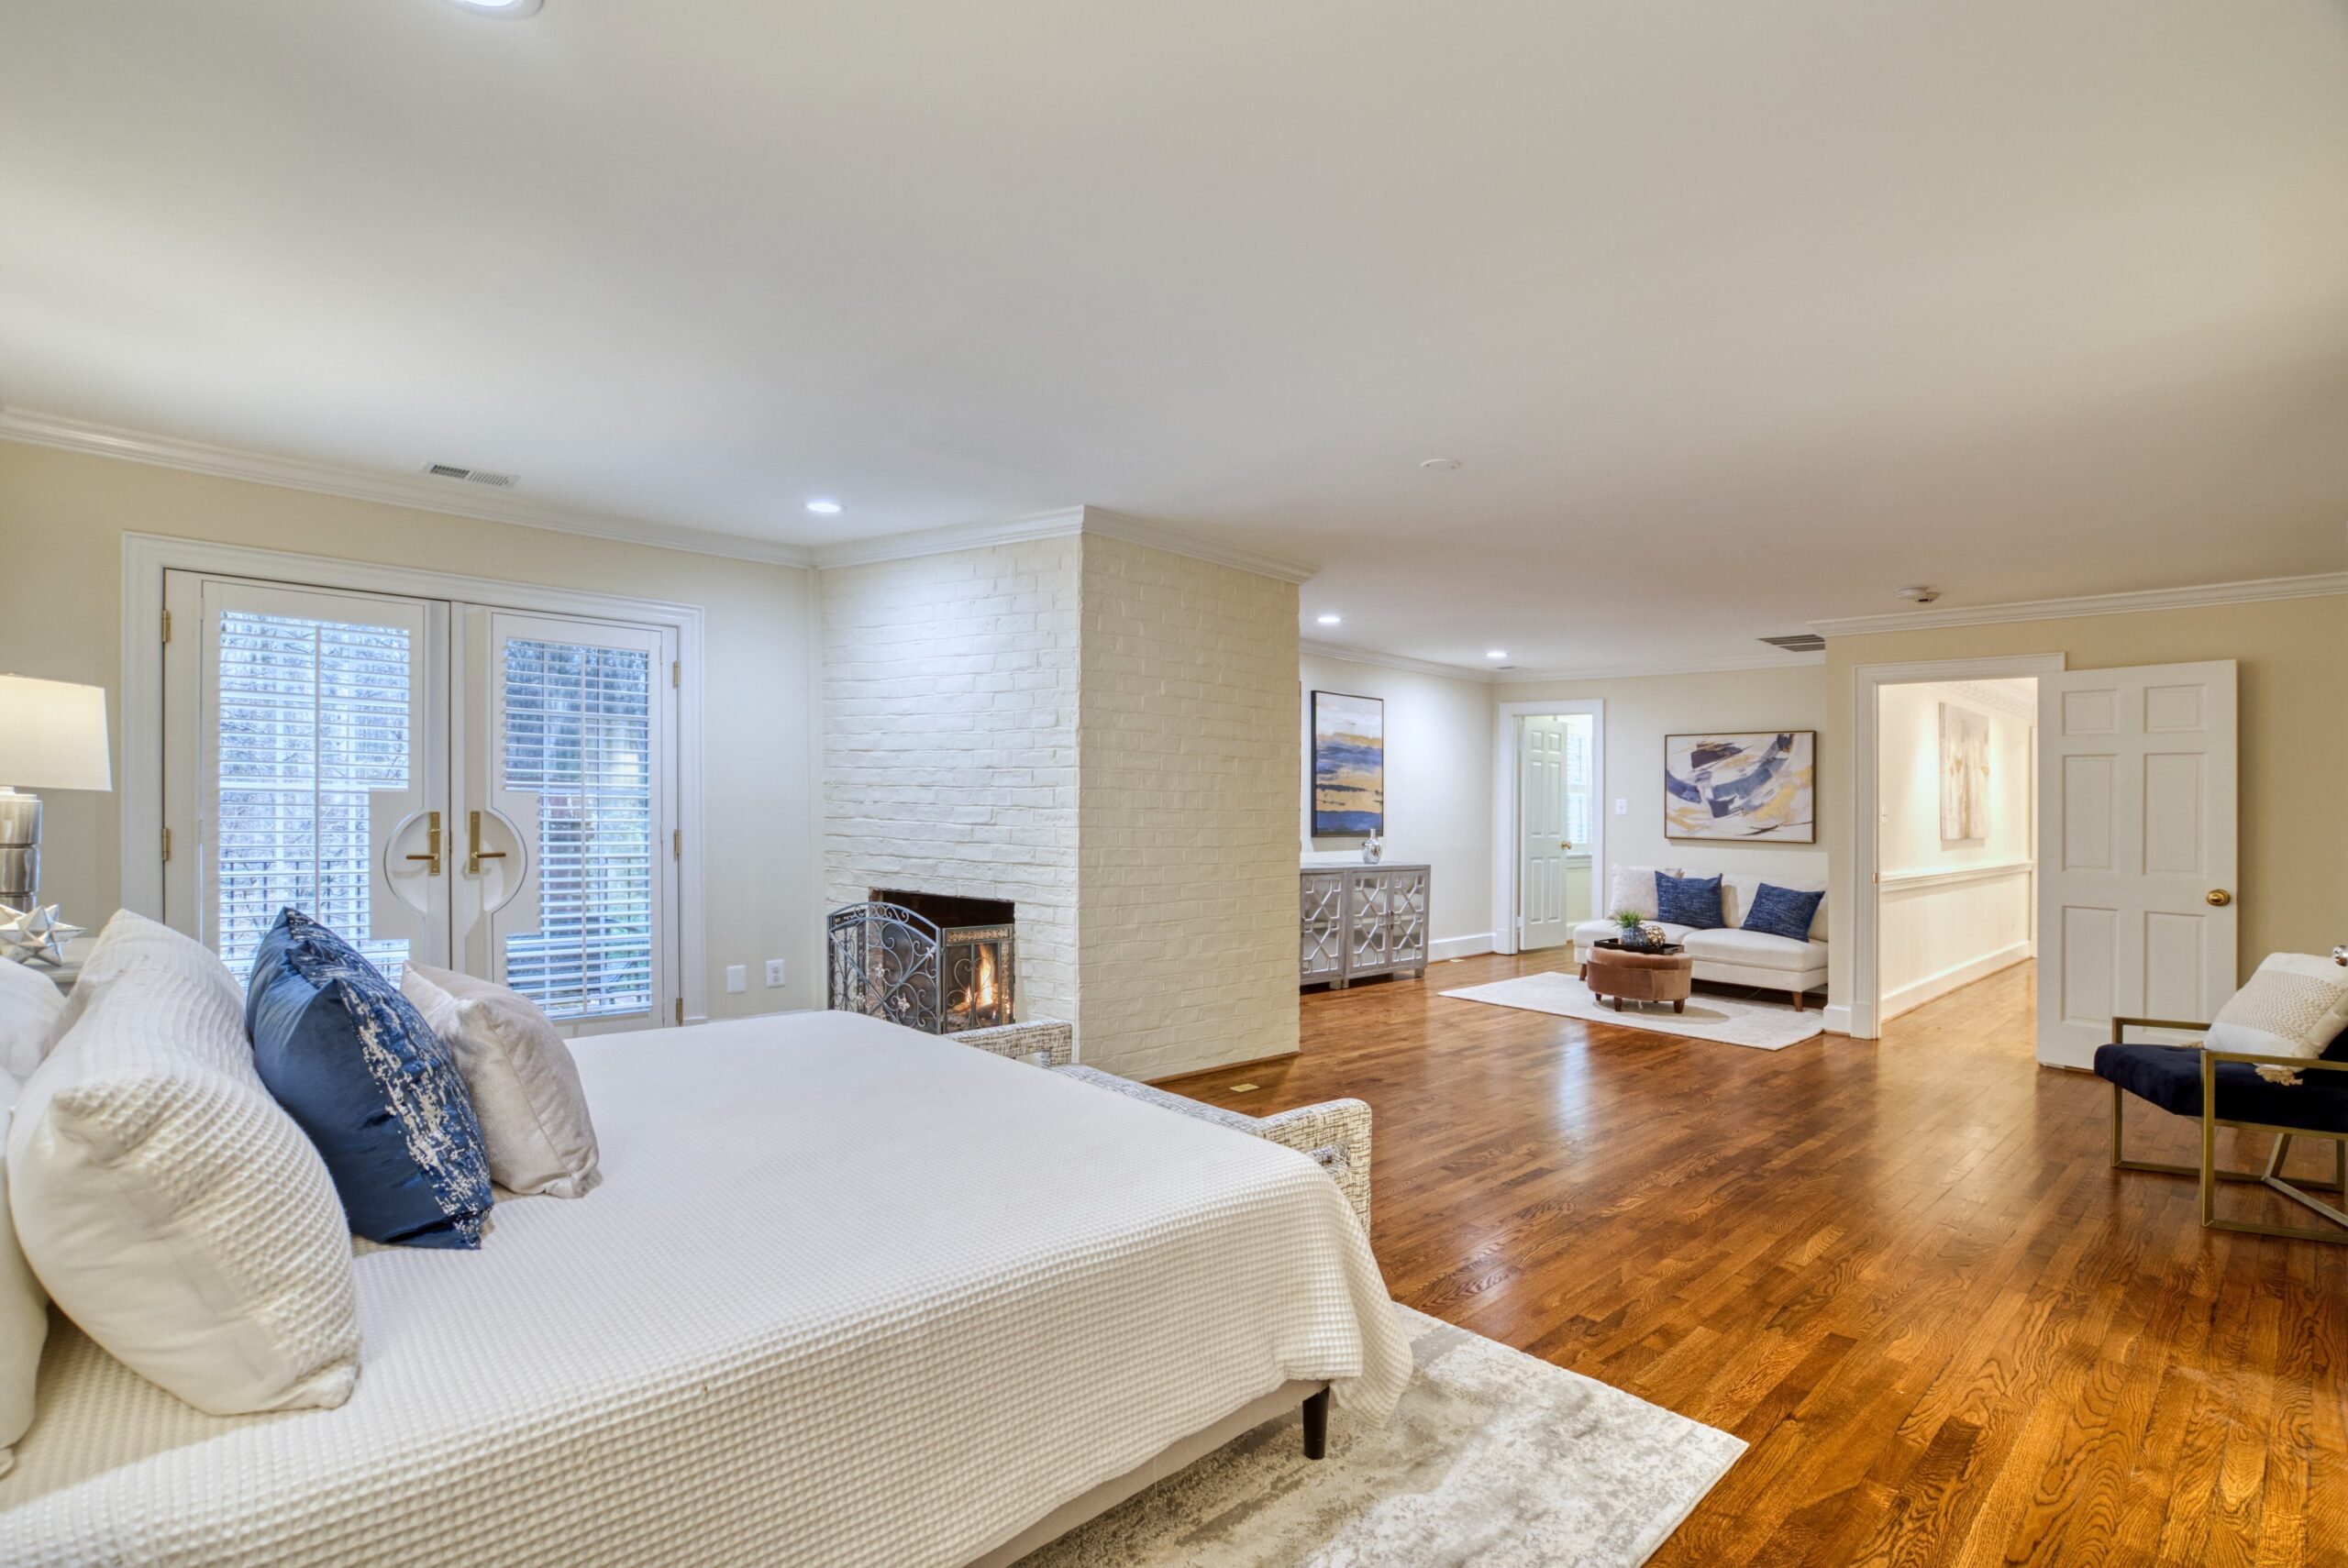 Professional interior photo of 718 Potomac Knolls Dr - showing the primary bedroom suite with white brick fireplace and sitting area and doors to private brick balcony